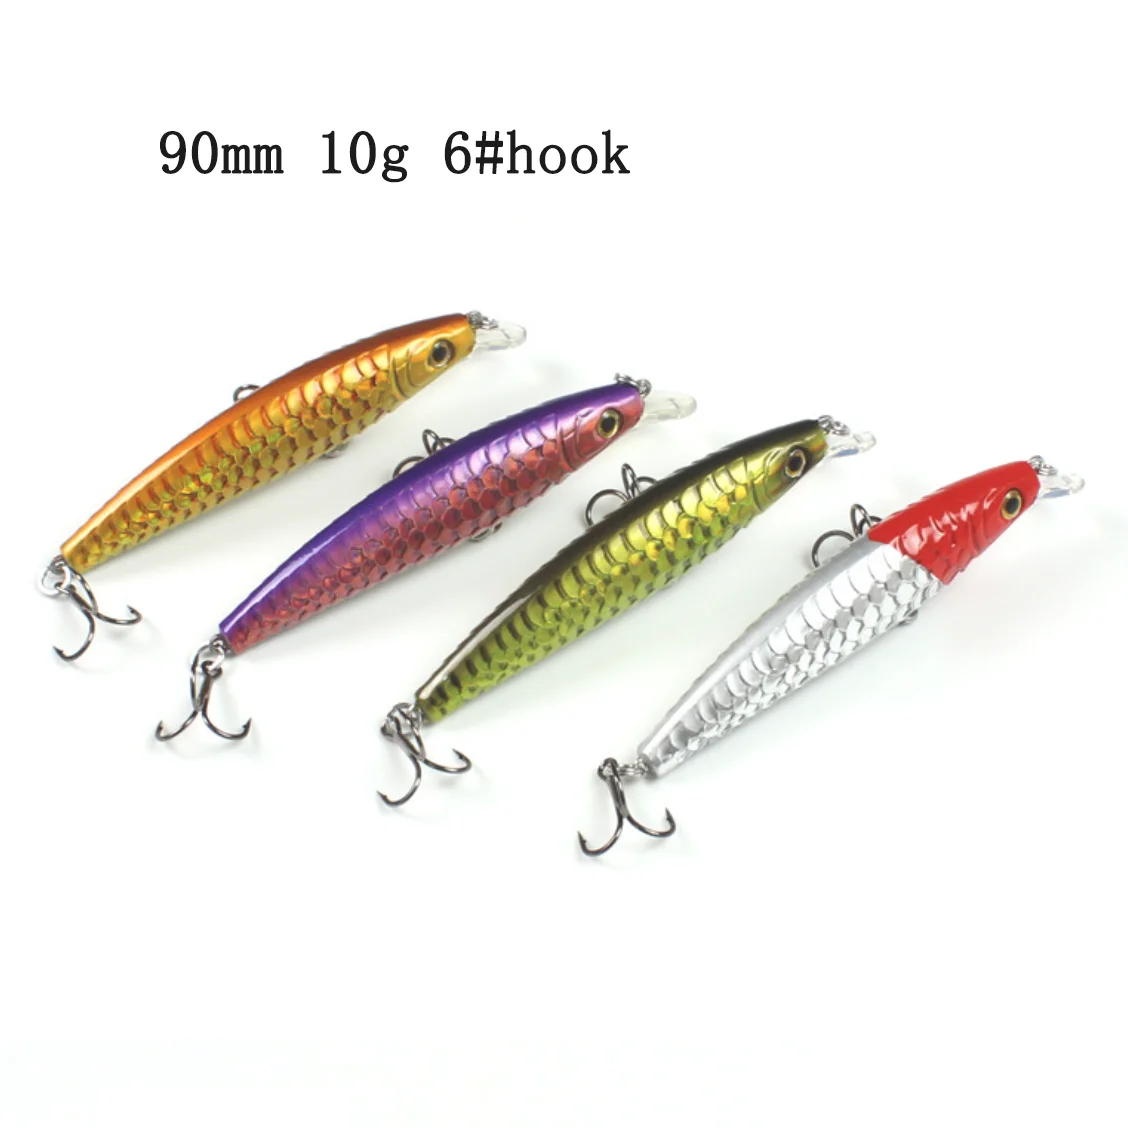 

1PC 9cm 10g Fishing Wobblers Crank Shad Lure Minnow Bionic Fake Floating Luya Bait Tackle Set for Sea Bass Accessories Crankbait